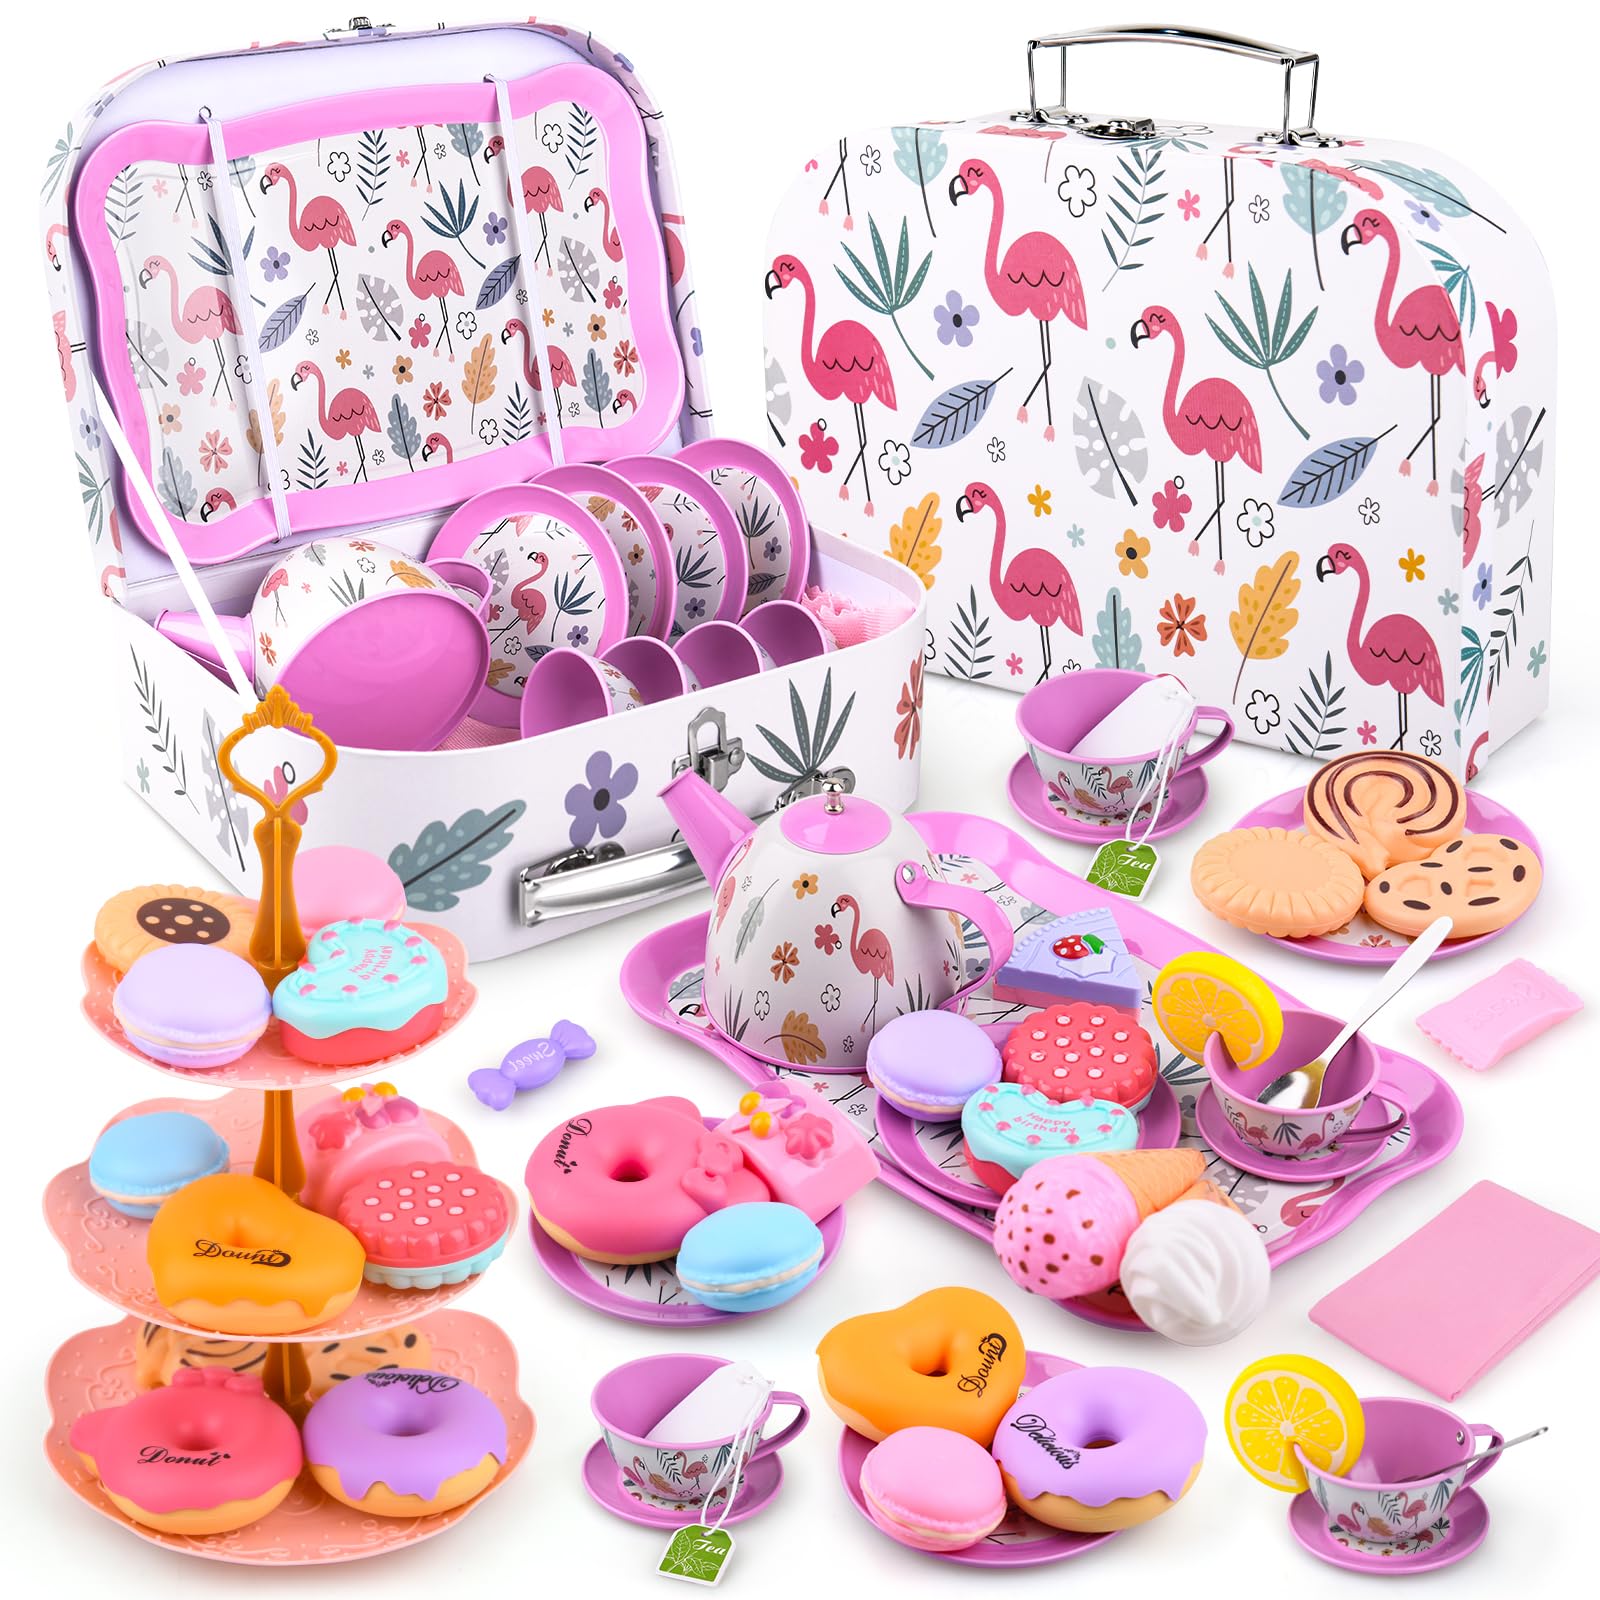 41Pcs Tea Party Set for Little Girls, Pretend Tin Teapot Set, Princess Tea Time Play Kitchen Toy with Dessert, Doughnut, Carrying Birthday Gift Case for Toddlers Age 3 4 5 6